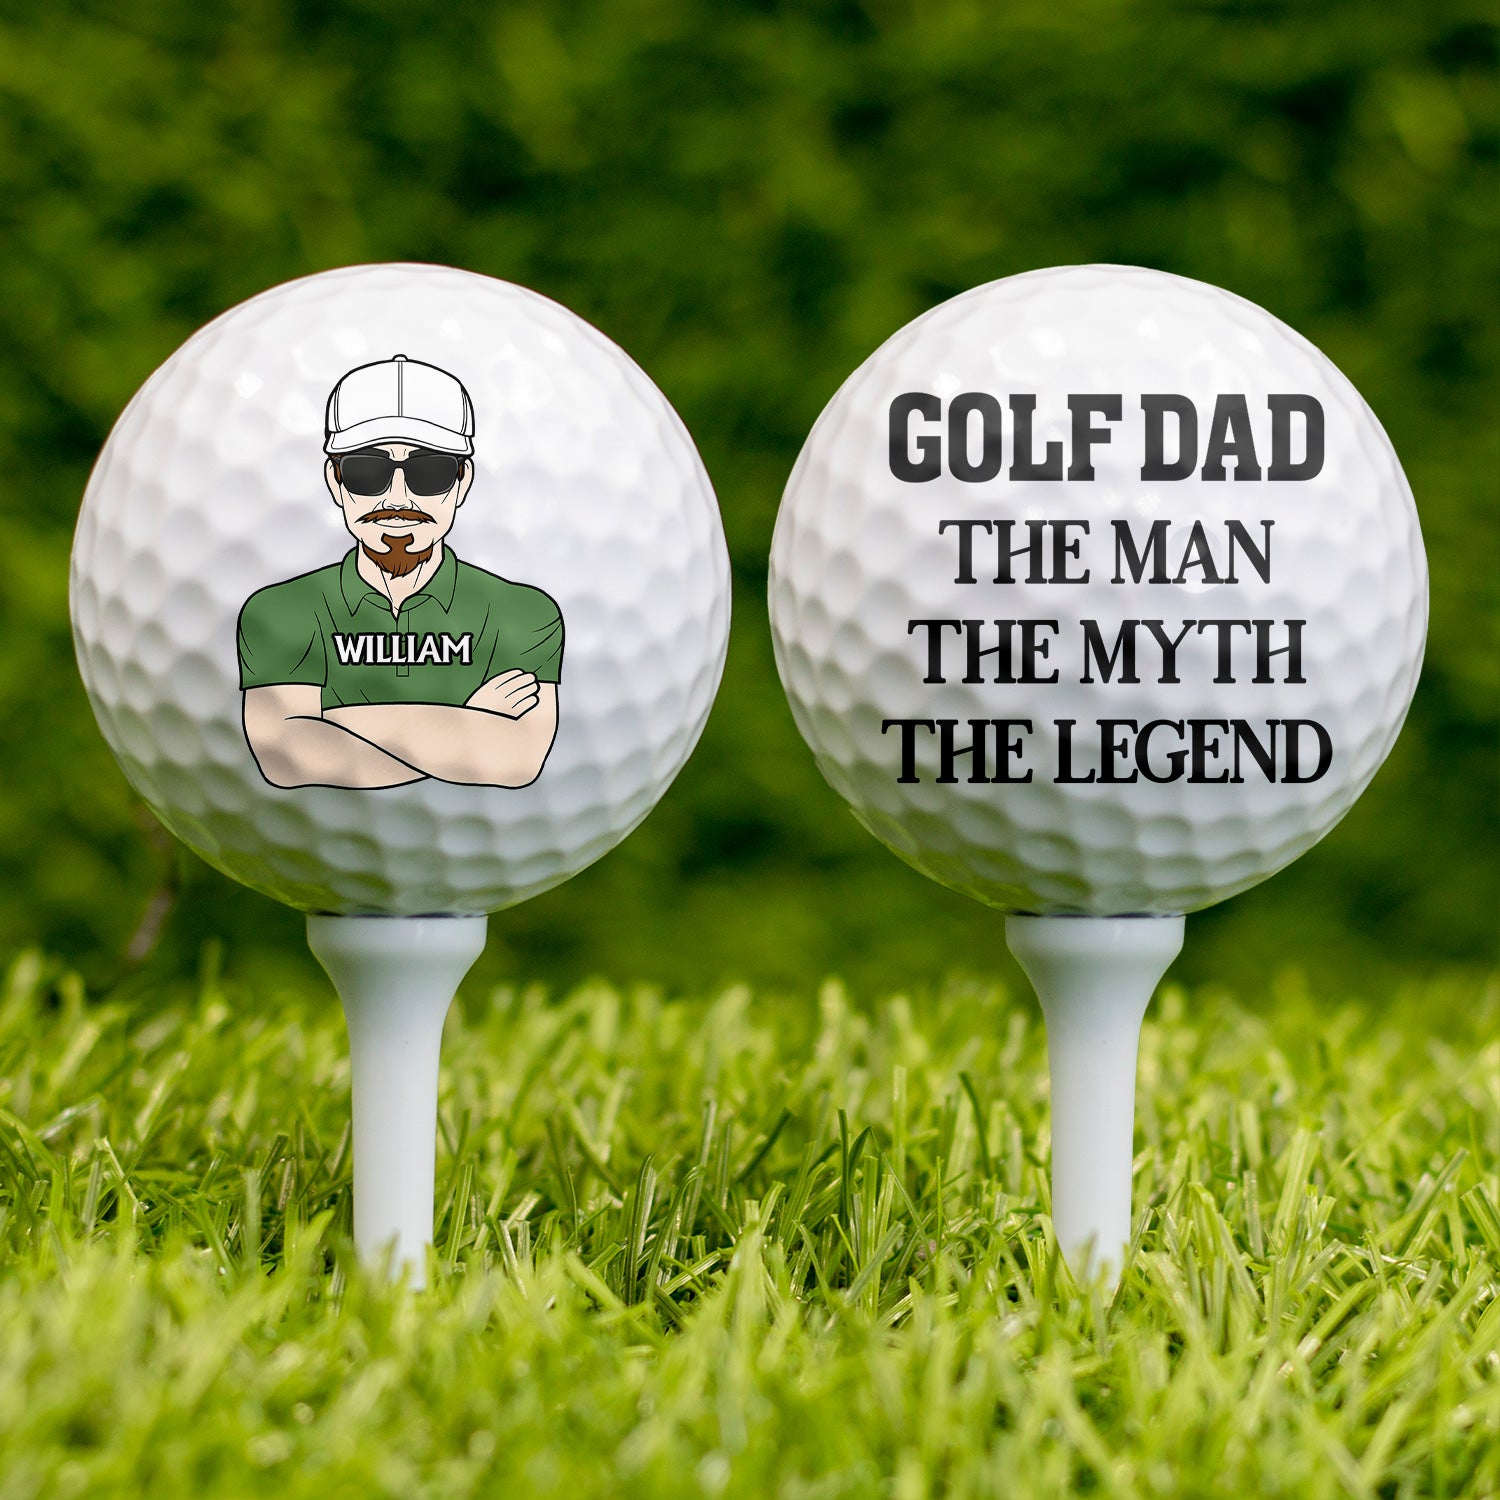 The Man The Myth The Legend - Gift For Dad, Father, Grandpa, Golfer, Golf Lover - Personalized Golf Ball